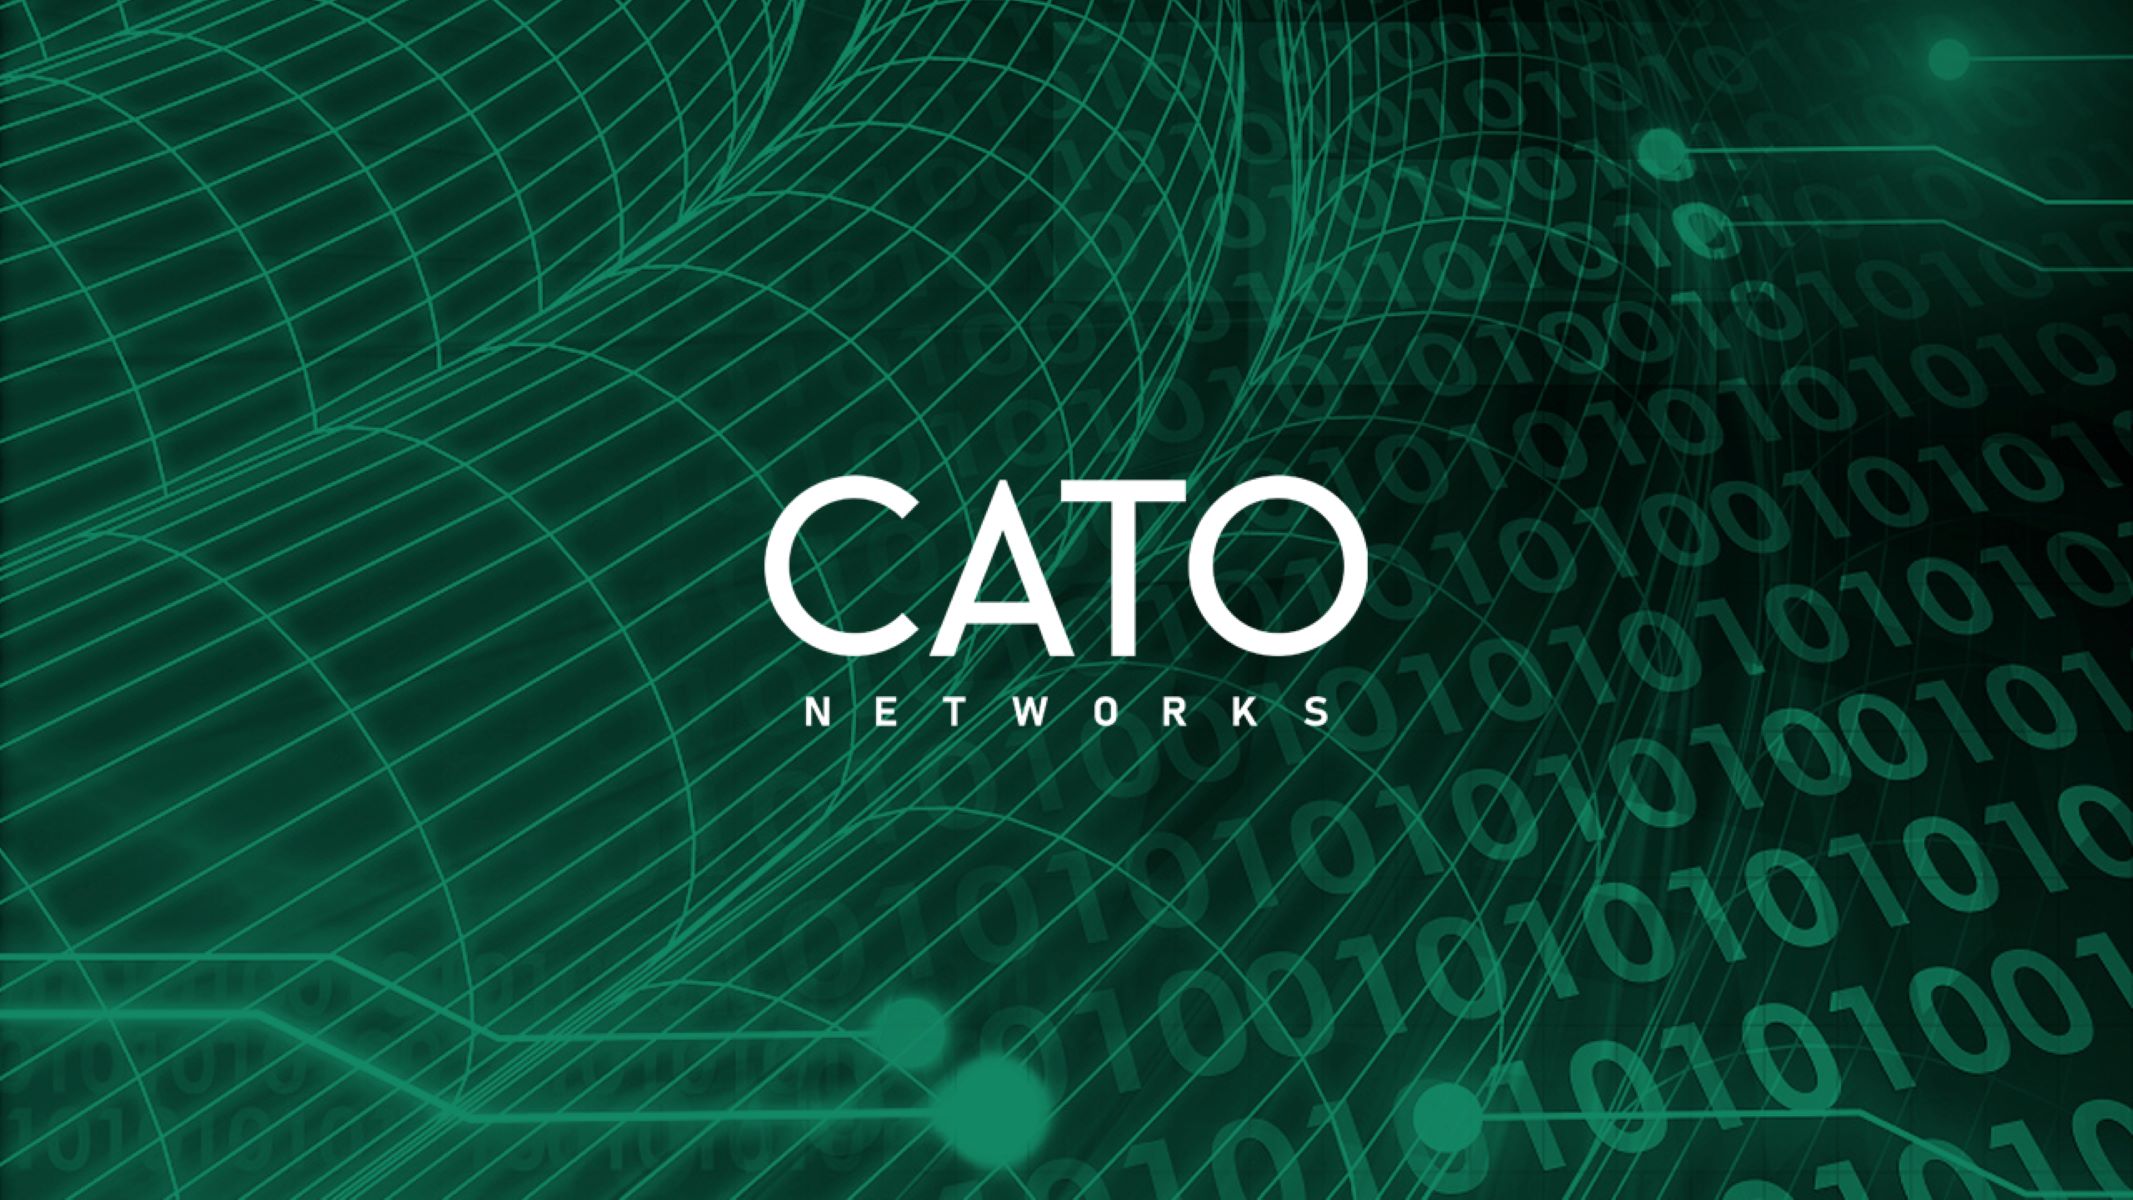 New Offering From Cato Networks Secures $238M In Funding Ahead Of IPO